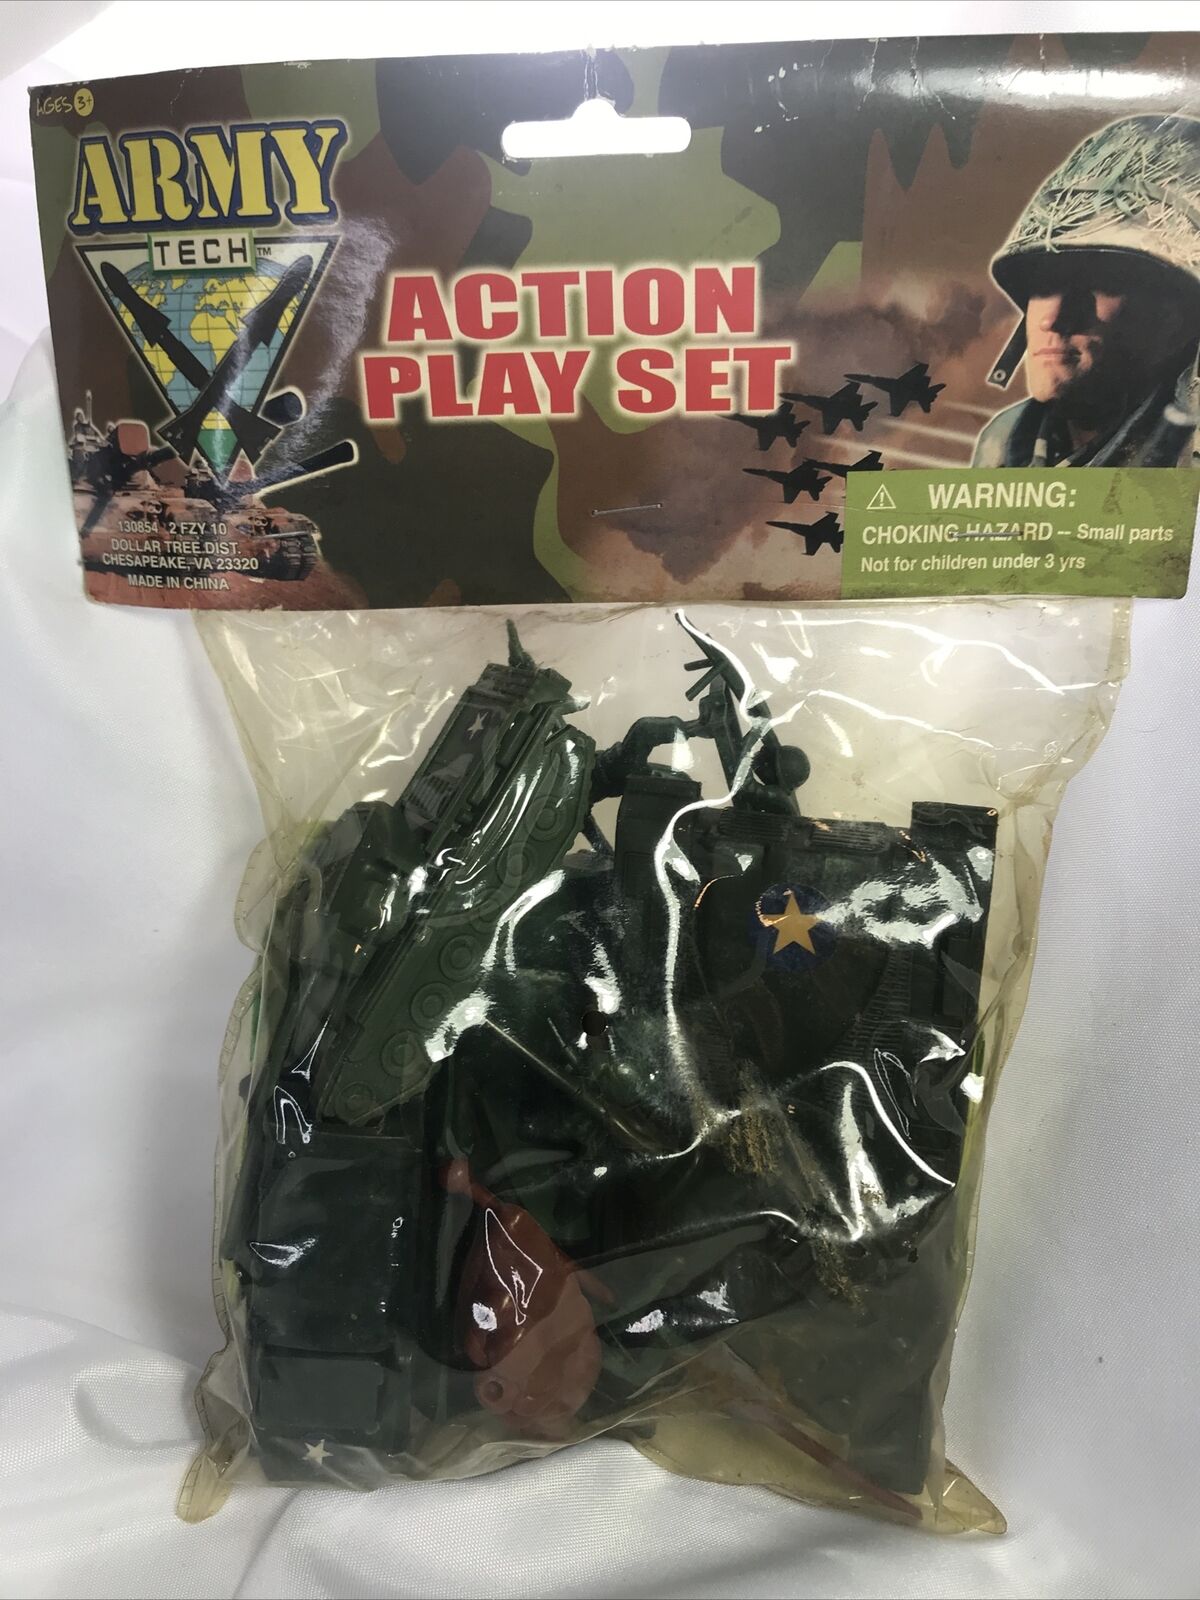 Retro Good Old Values Army Tech Plastic Toy, Action Play Set Army Guys